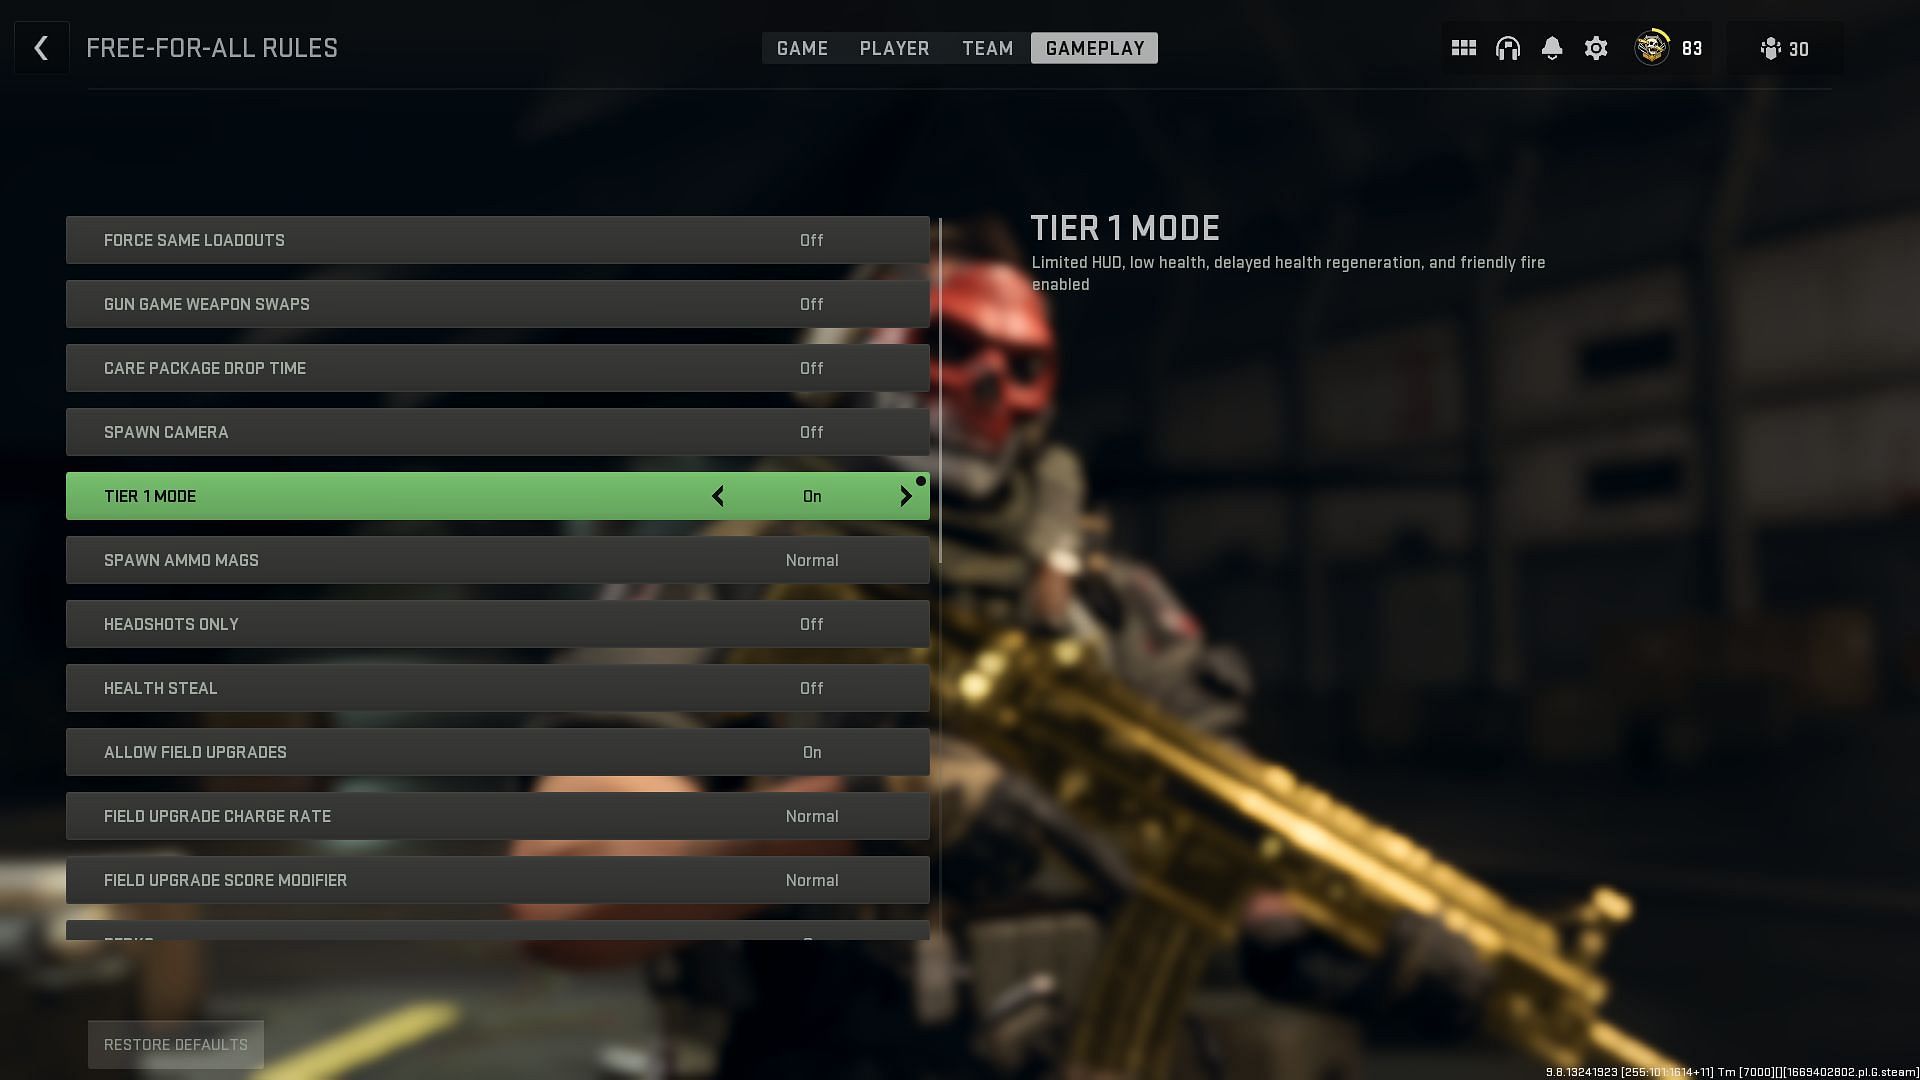 Enabling Tier 1 mode in Private Match (Image via Activision)